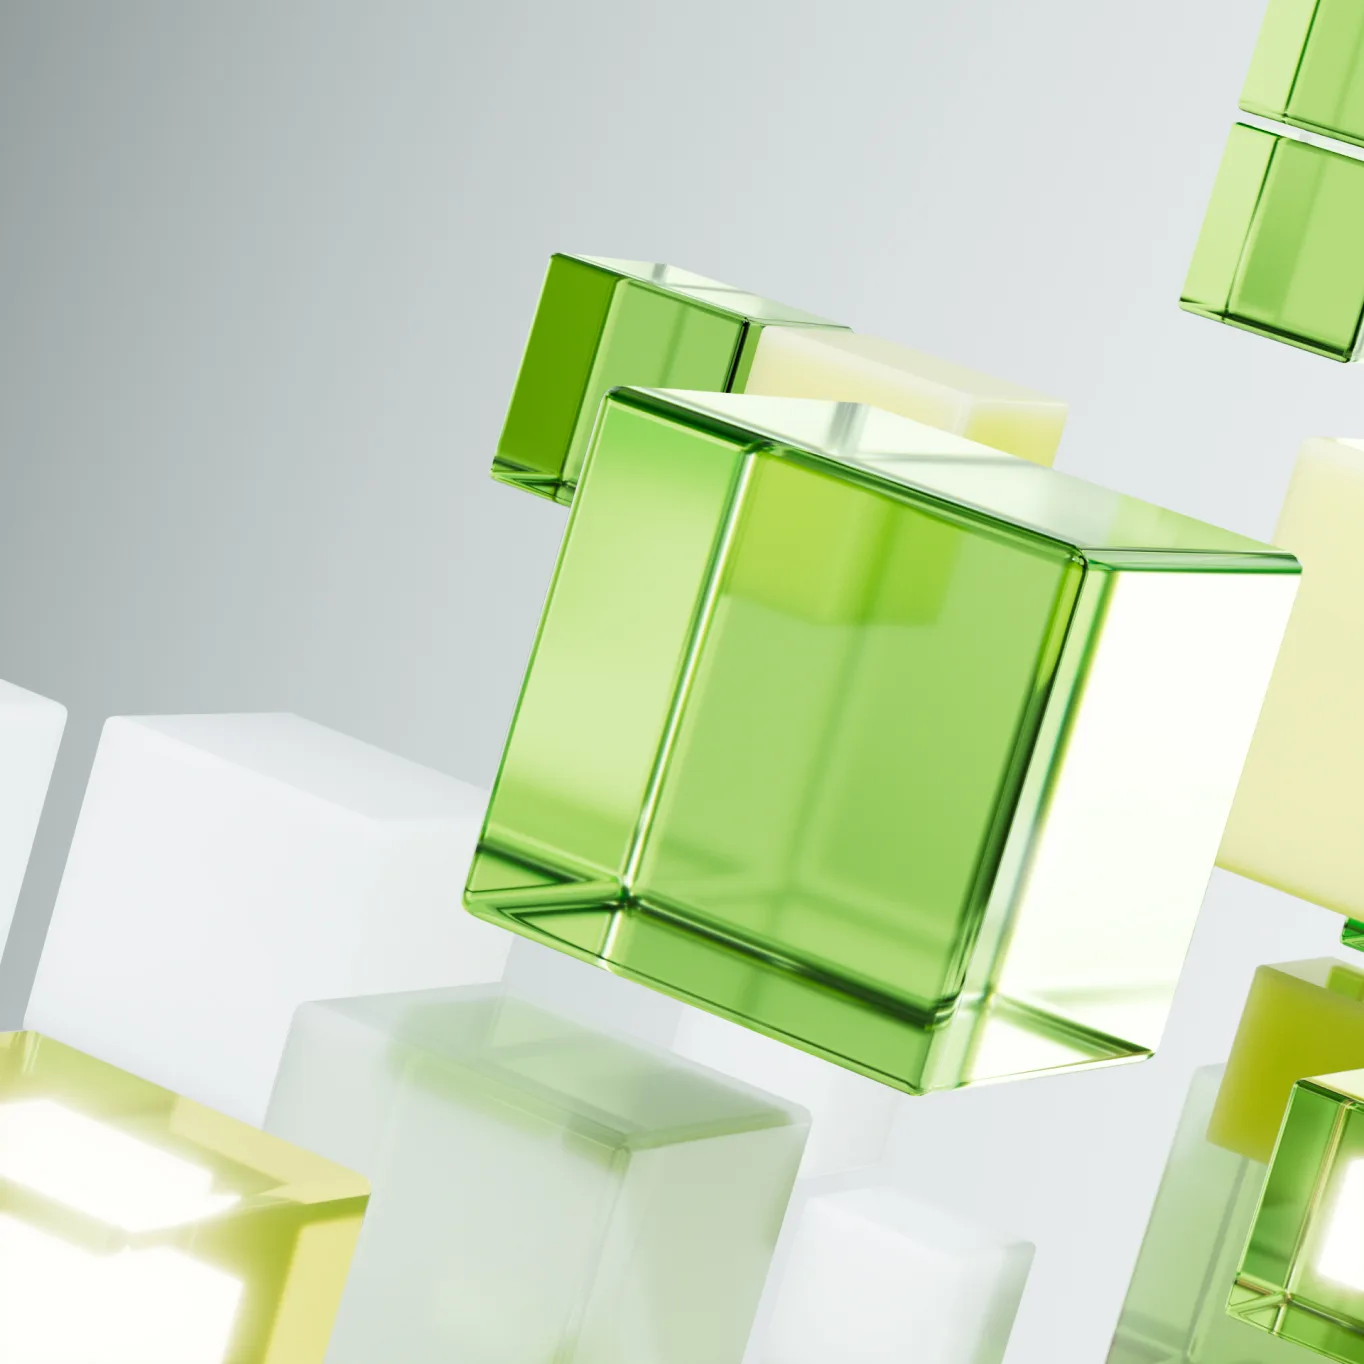 A close-up image of a digitally designed series of cubes that range from colorless to glowing vibrant shades of green. This visual represents how an idea ignites the potential of AI to contribute to human flourishing, magnifying endless possibilities in this rapid revolution.